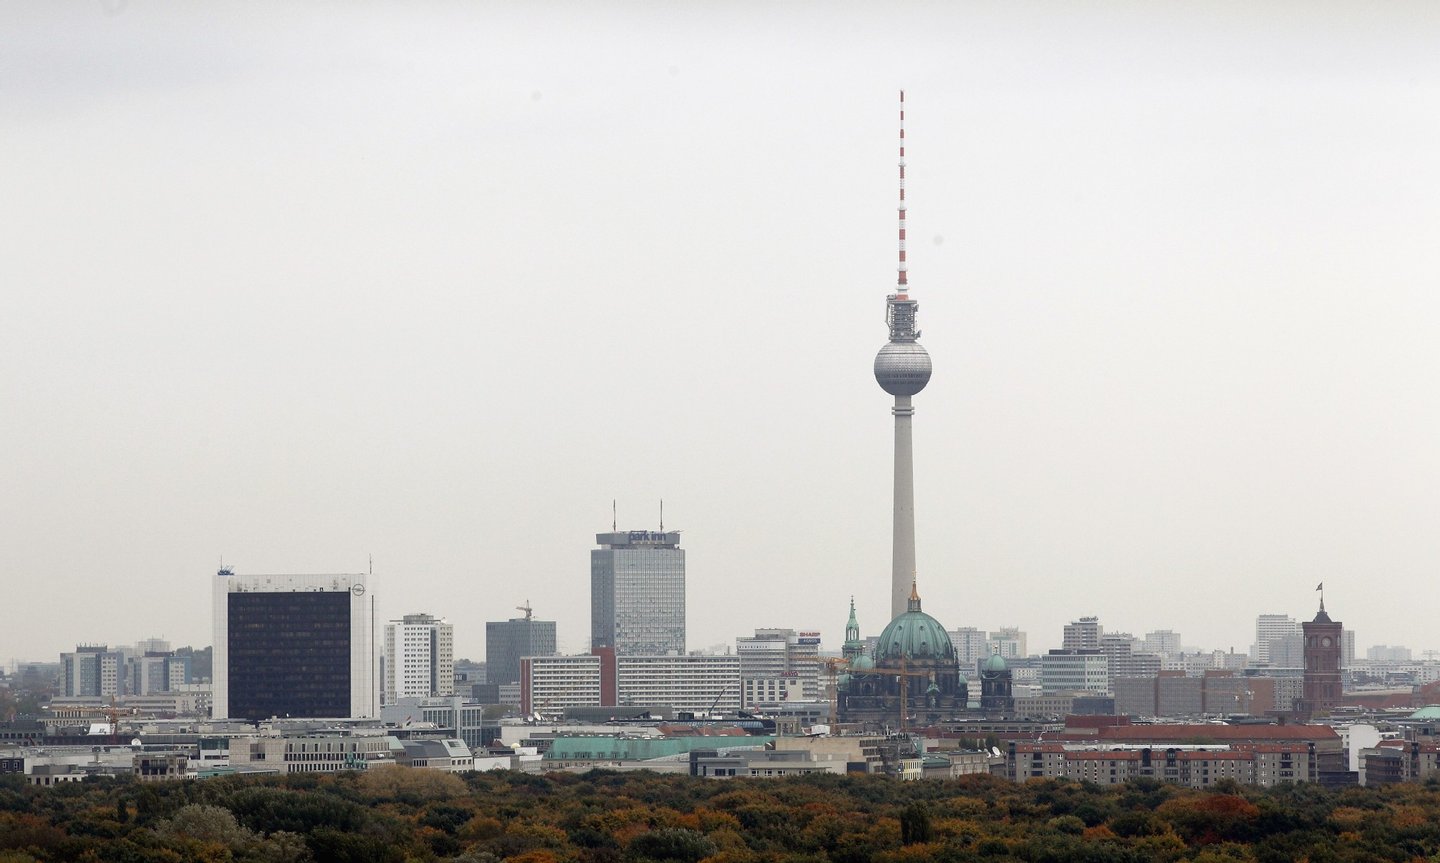 BERLIN - OCTOBER 22: City landmarks as the Berlin television tower (TV) are pictured on October 22, 2010 in Berlin, Germany. (Photo by Andreas Rentz/Getty Images)